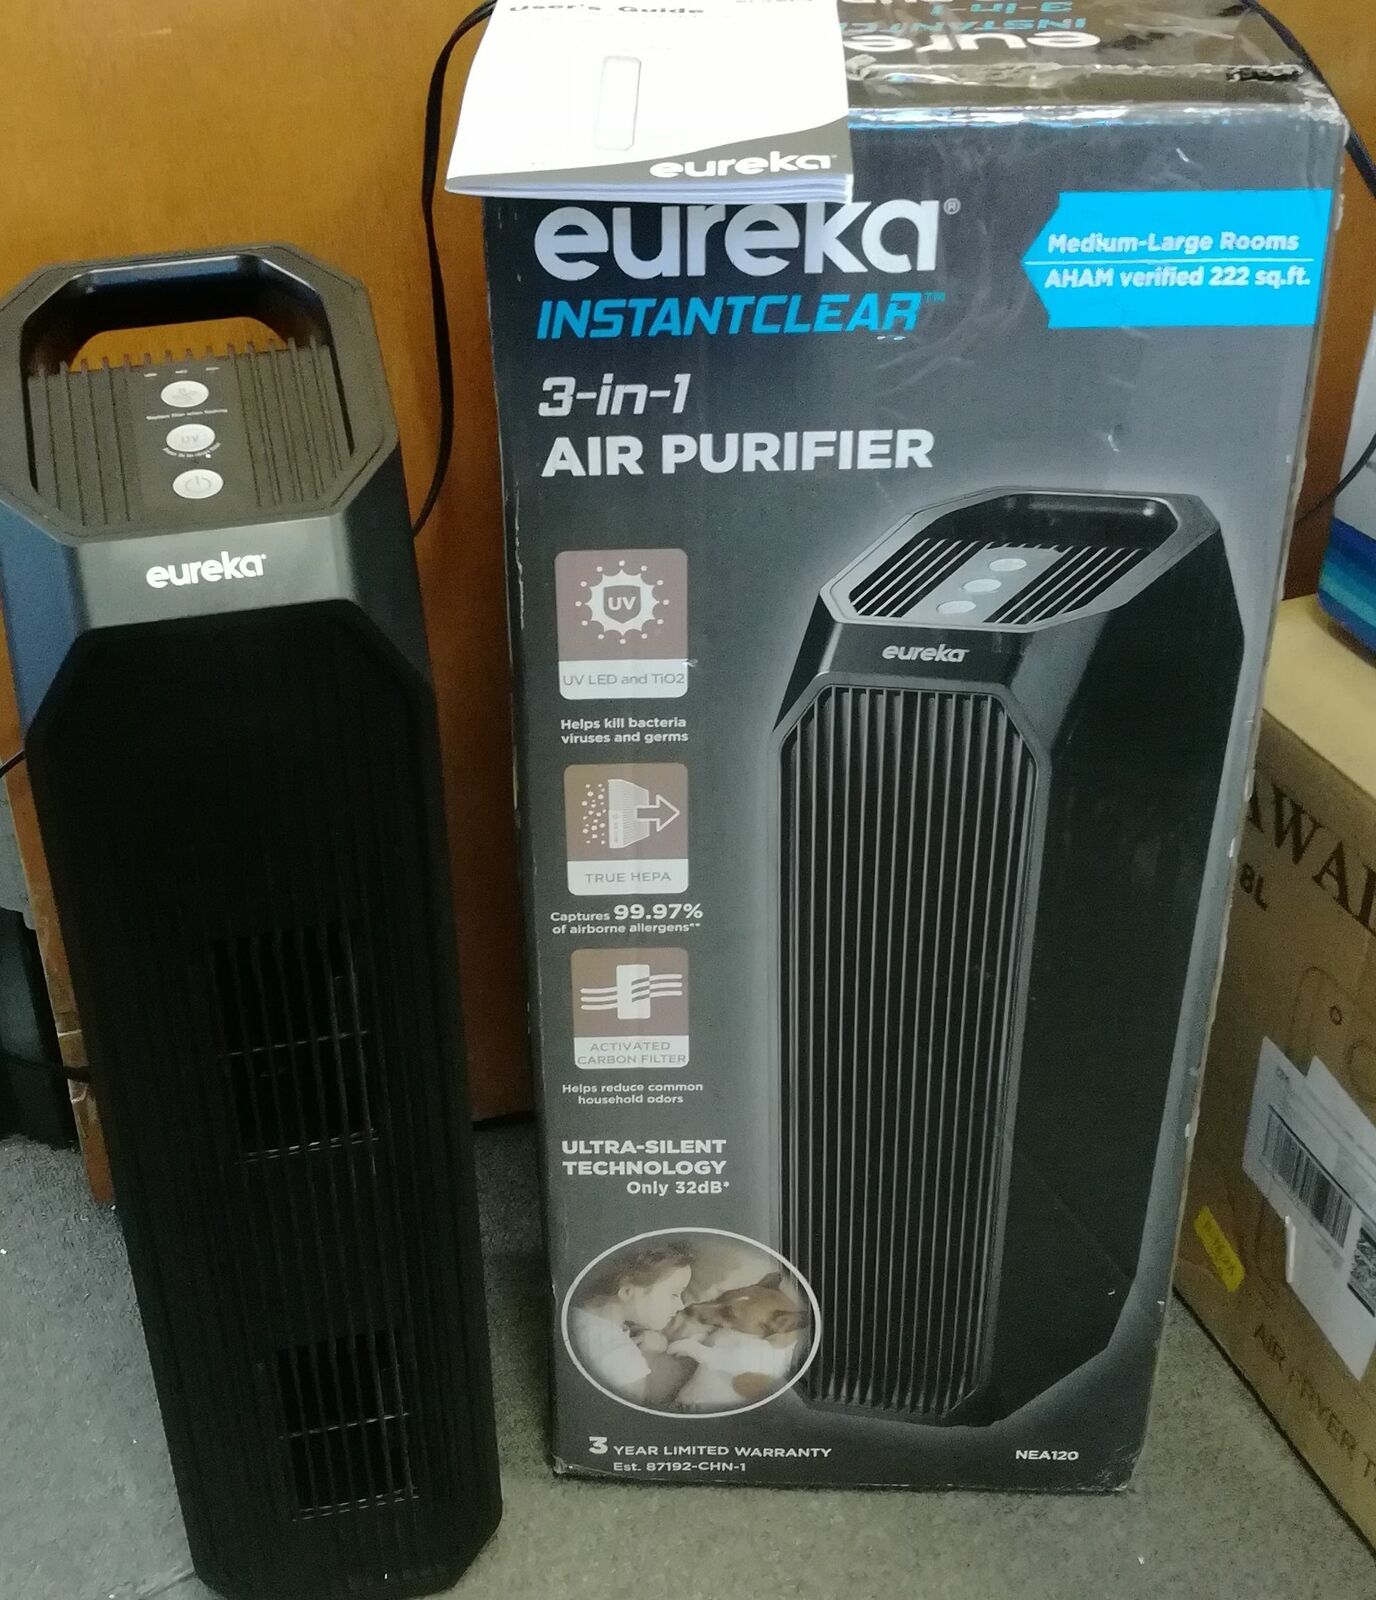 Sales of SALE items from new works Eureka Instant Clear 26' NEA120 Special price Purifier Air 3-in-1 True Cleaner HEPA